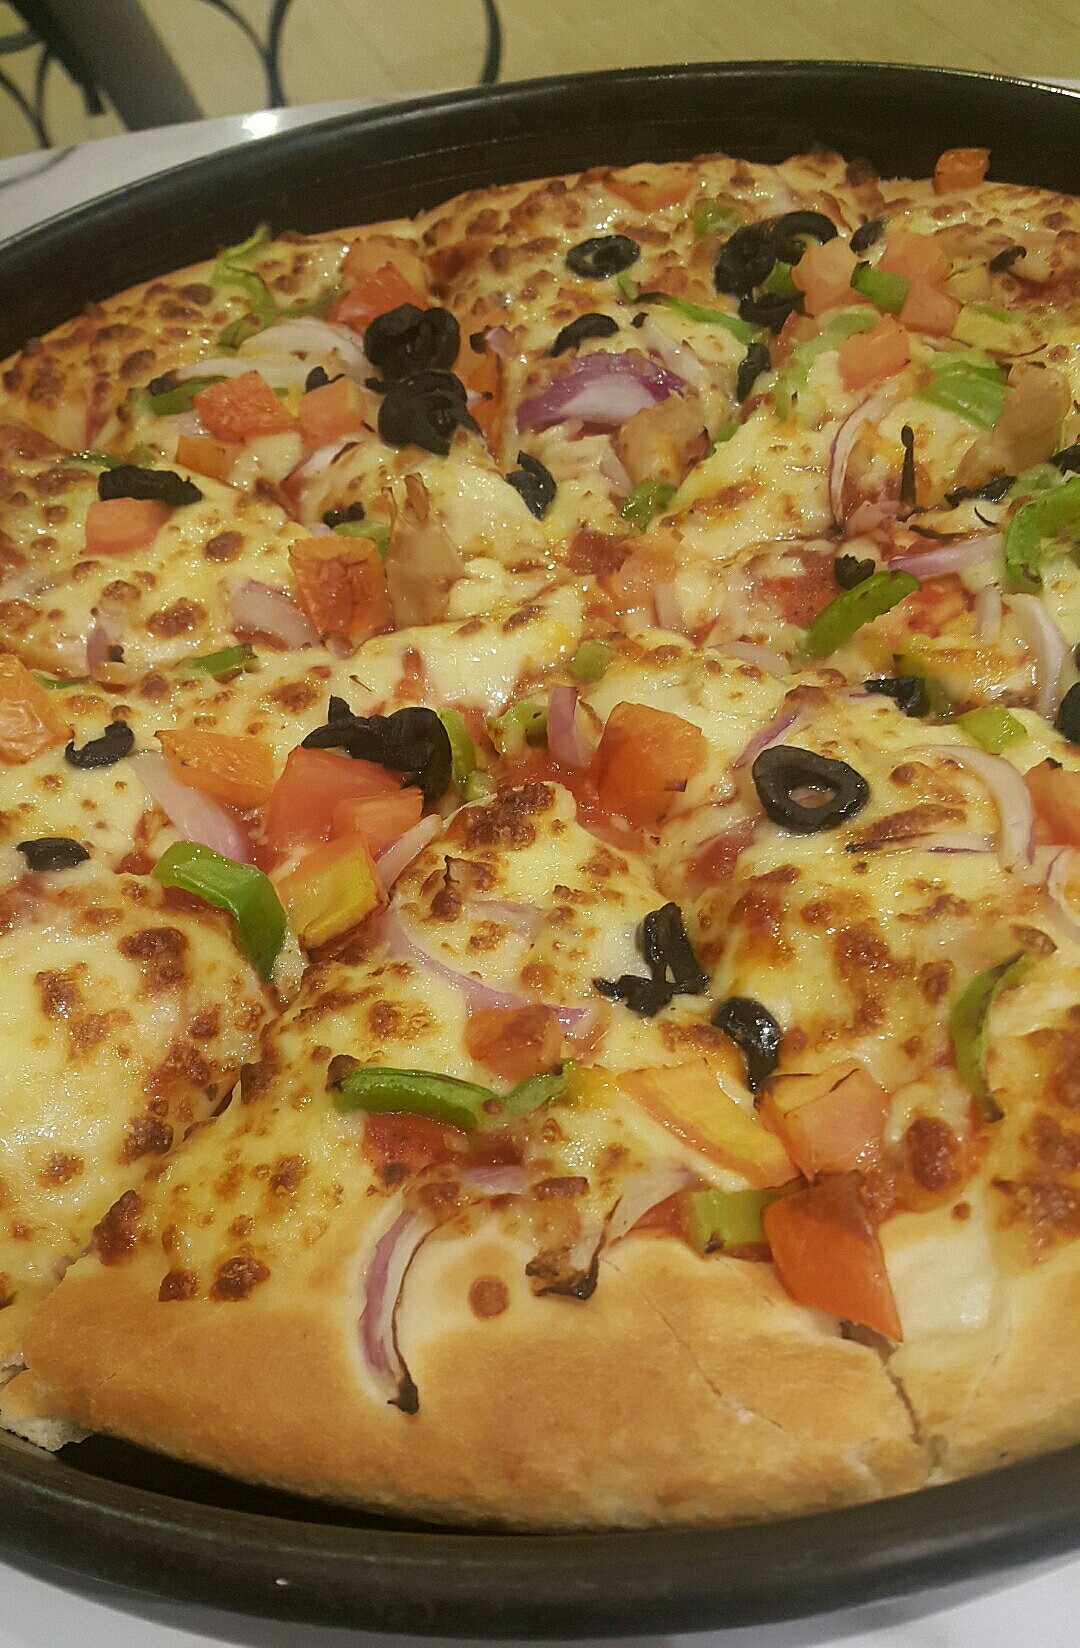 #pizza and family gathering @ Pizza Hut - Bahrain